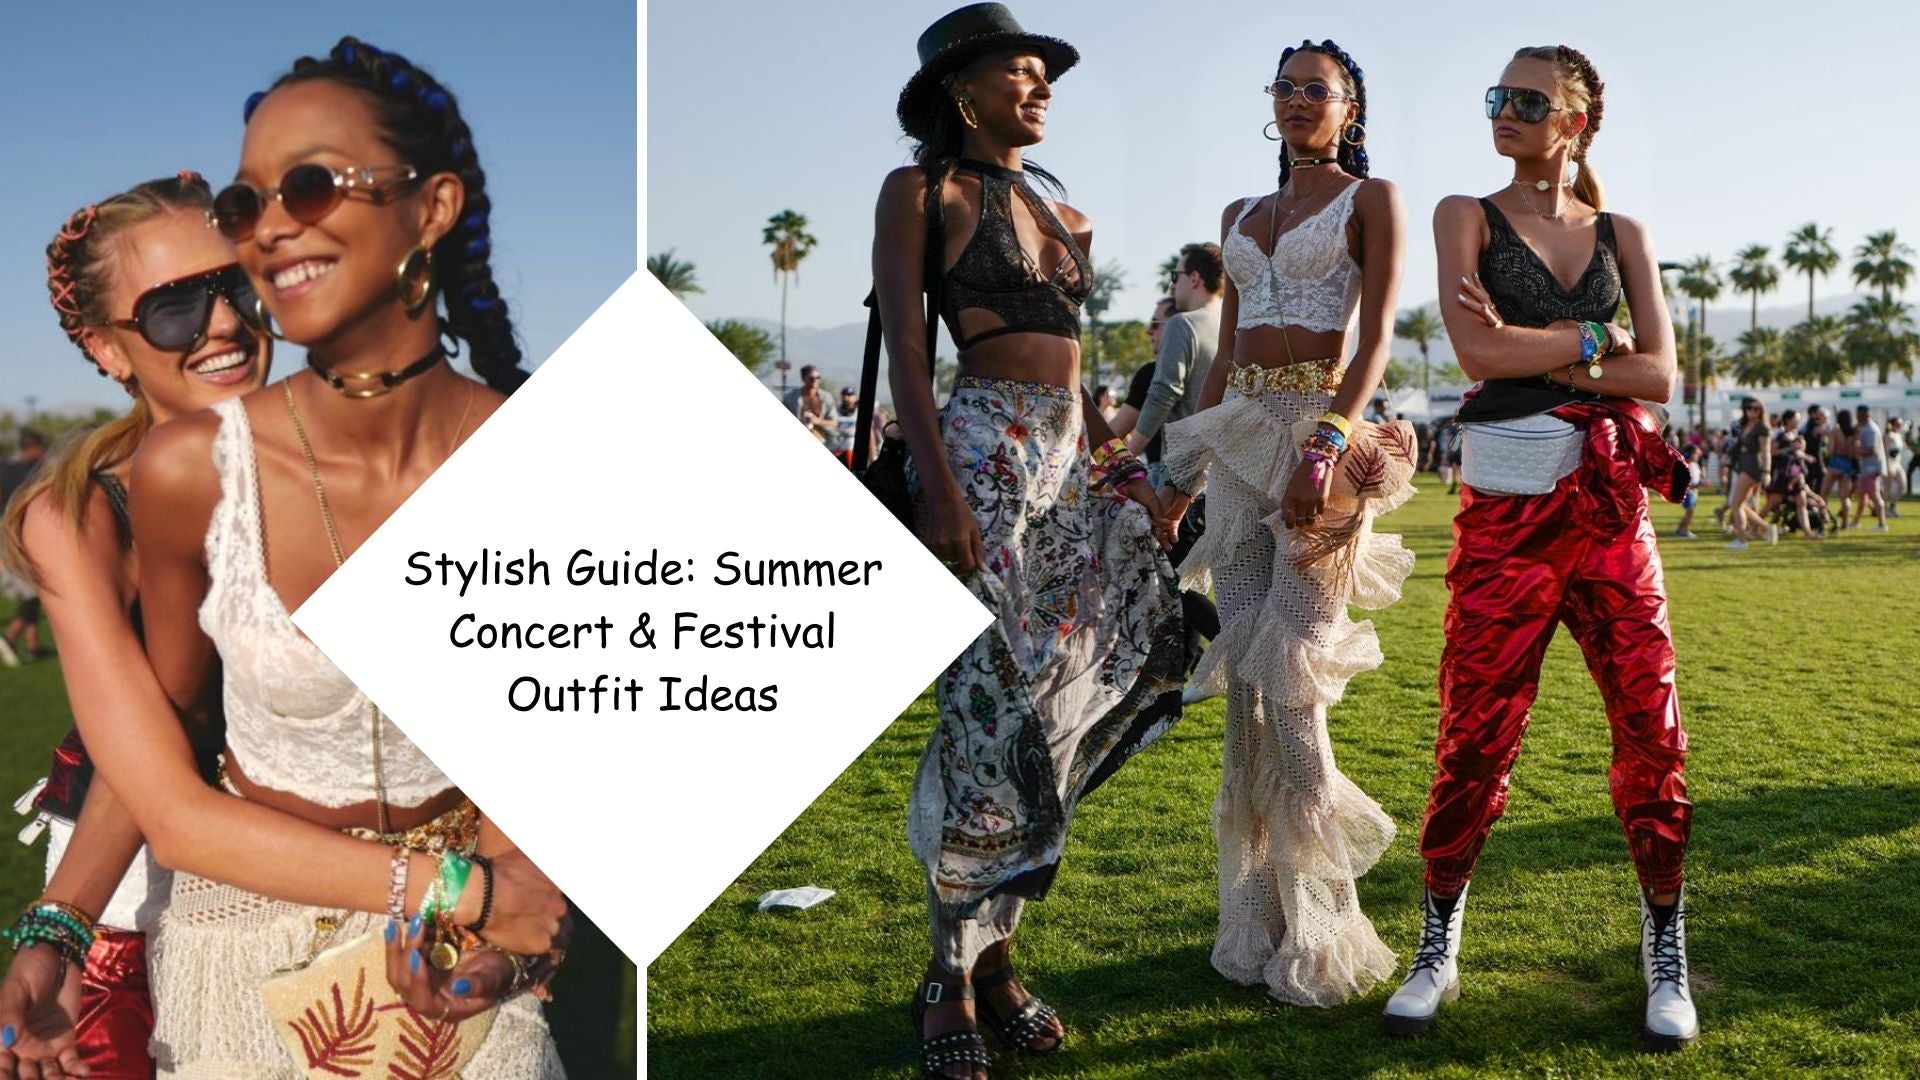 Stylish Guide: Summer Concert & Festival Outfit Ideas